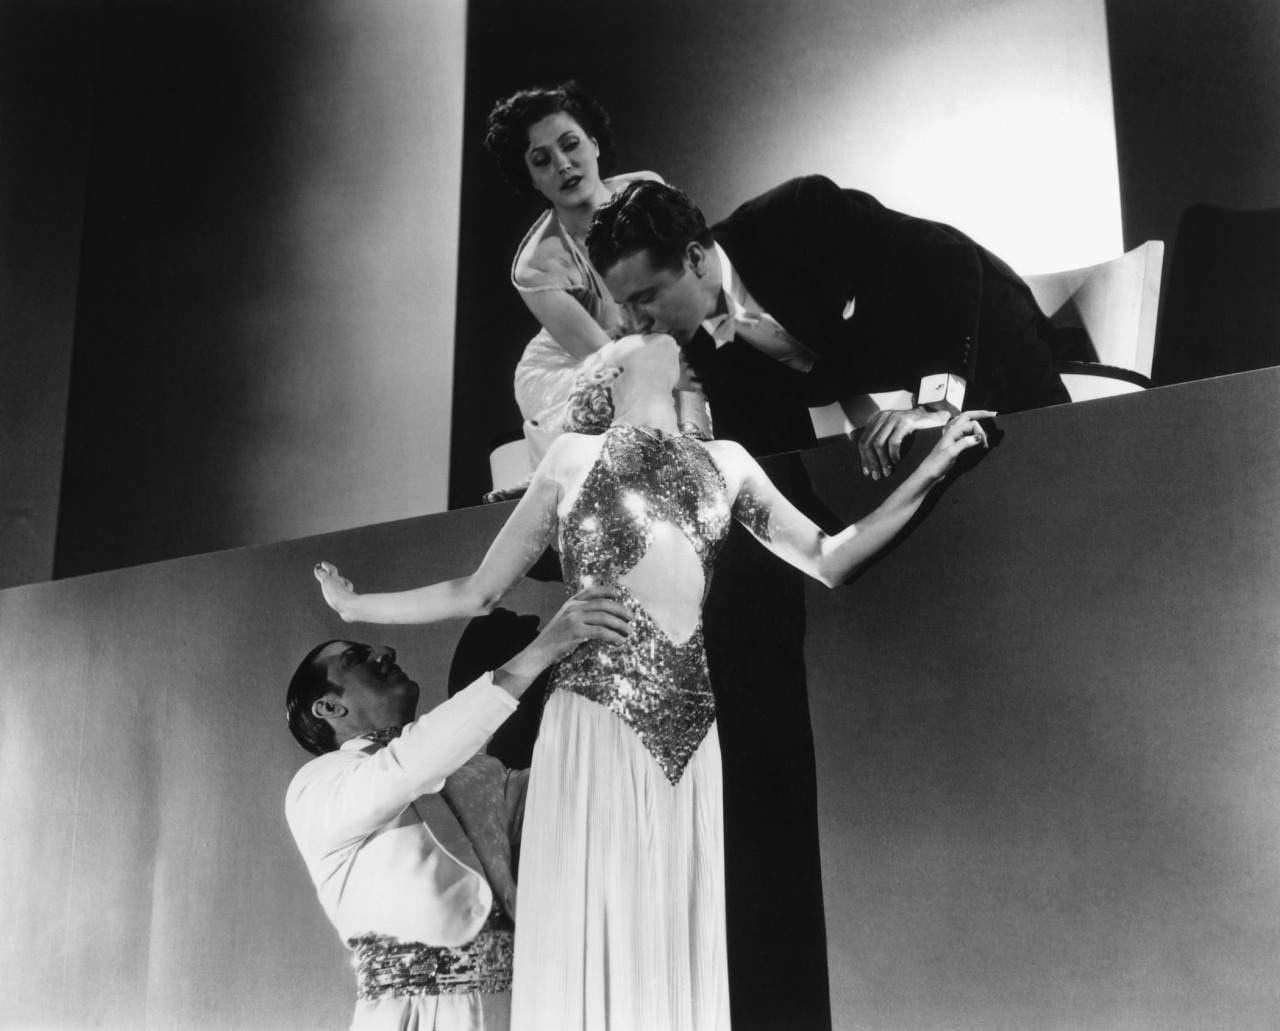 Michigan Theater to screen classic musical Gold Diggers of 1935